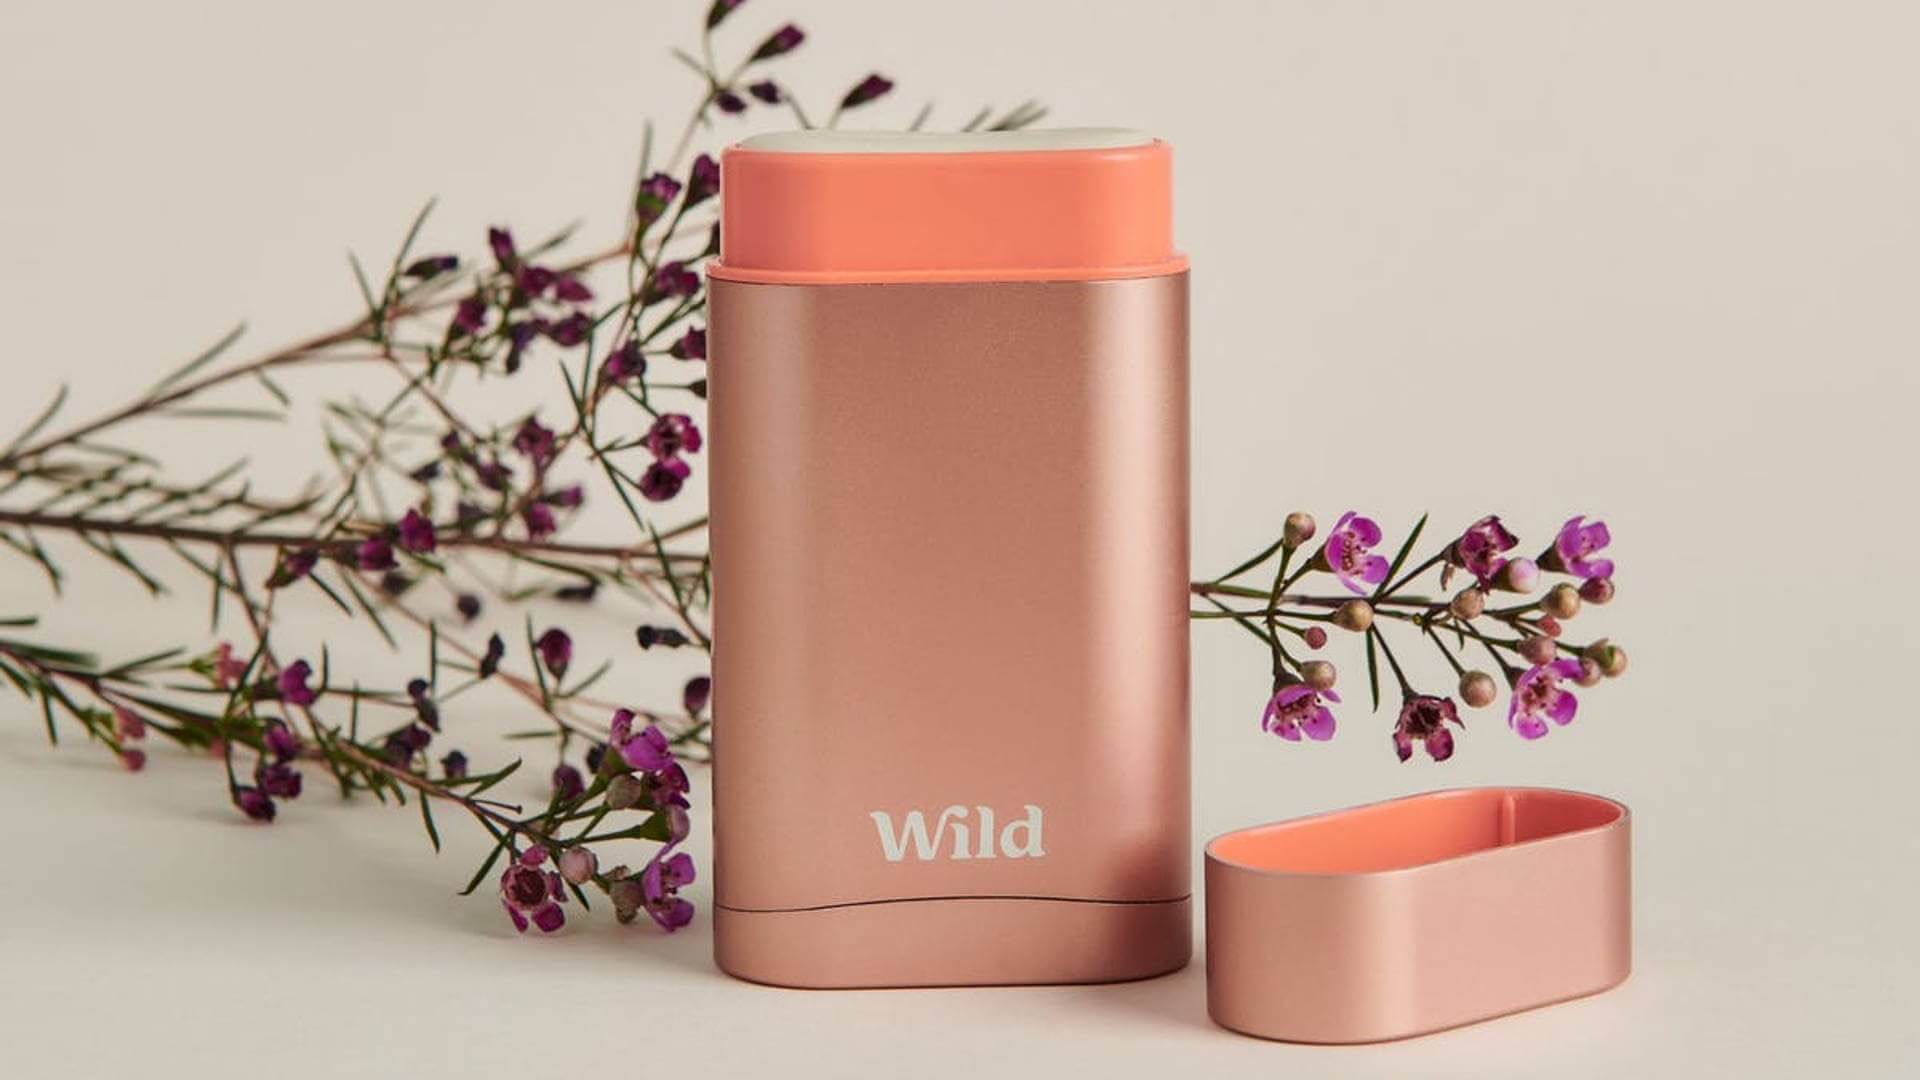 Wild Deodorant gained over 100,000 subscribers in 7 months